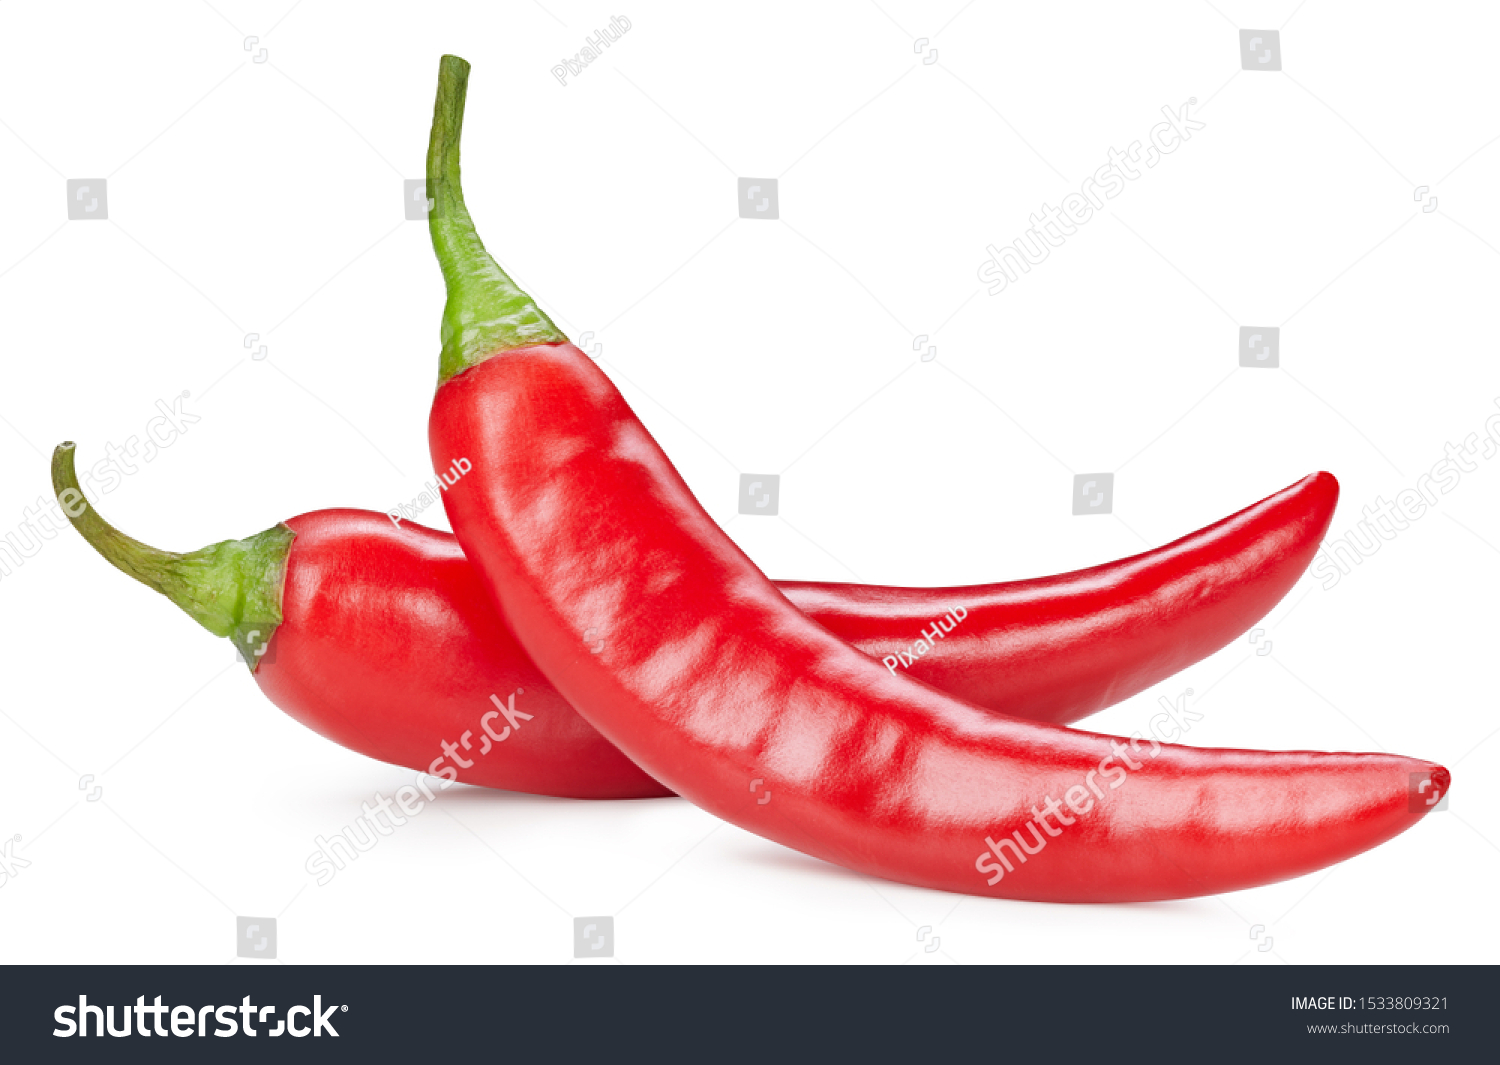 Chili pepper isolated on a white background. Chili hot pepper clipping path #1533809321